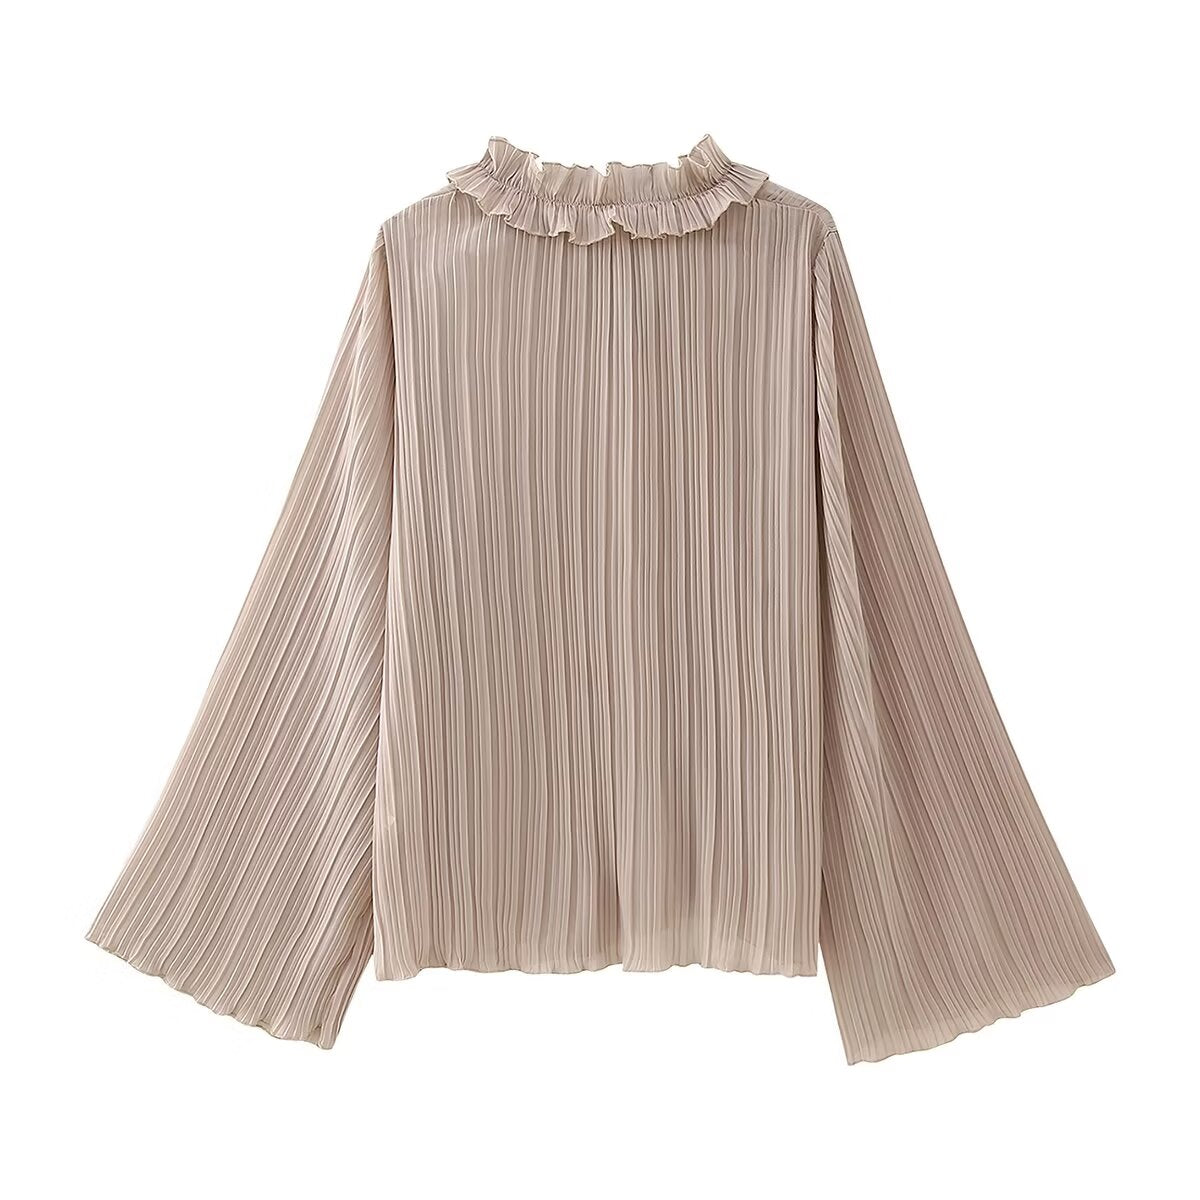 Spring Summer Pleated Chiffon Shirt Women Romantic Fungus Lace-up Loose Casual Simple